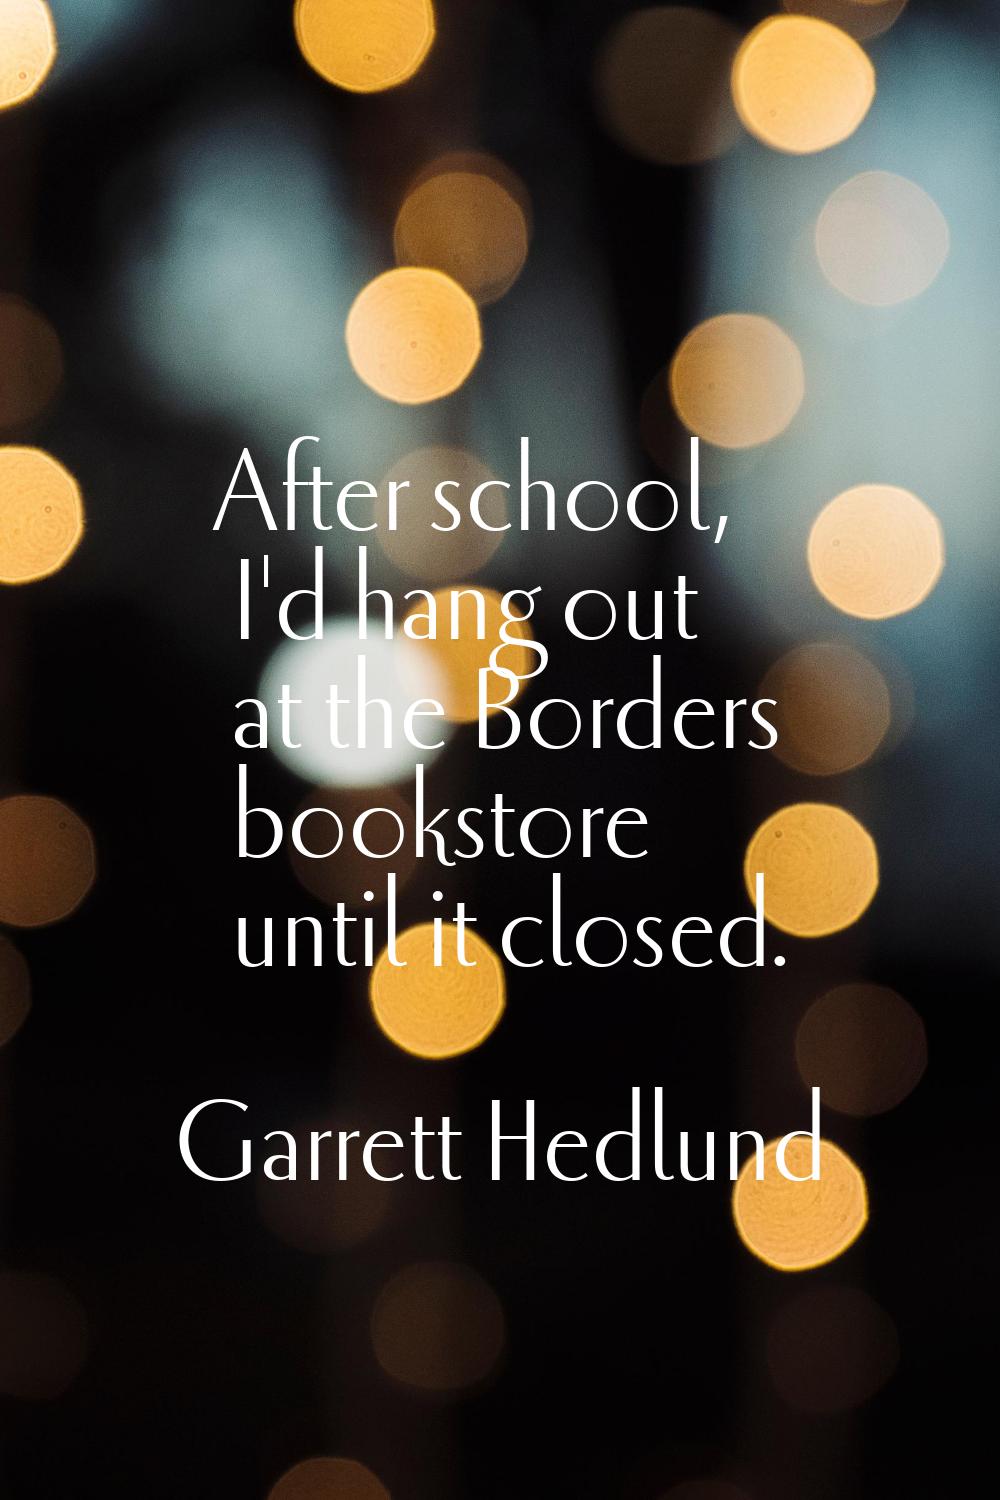 After school, I'd hang out at the Borders bookstore until it closed.